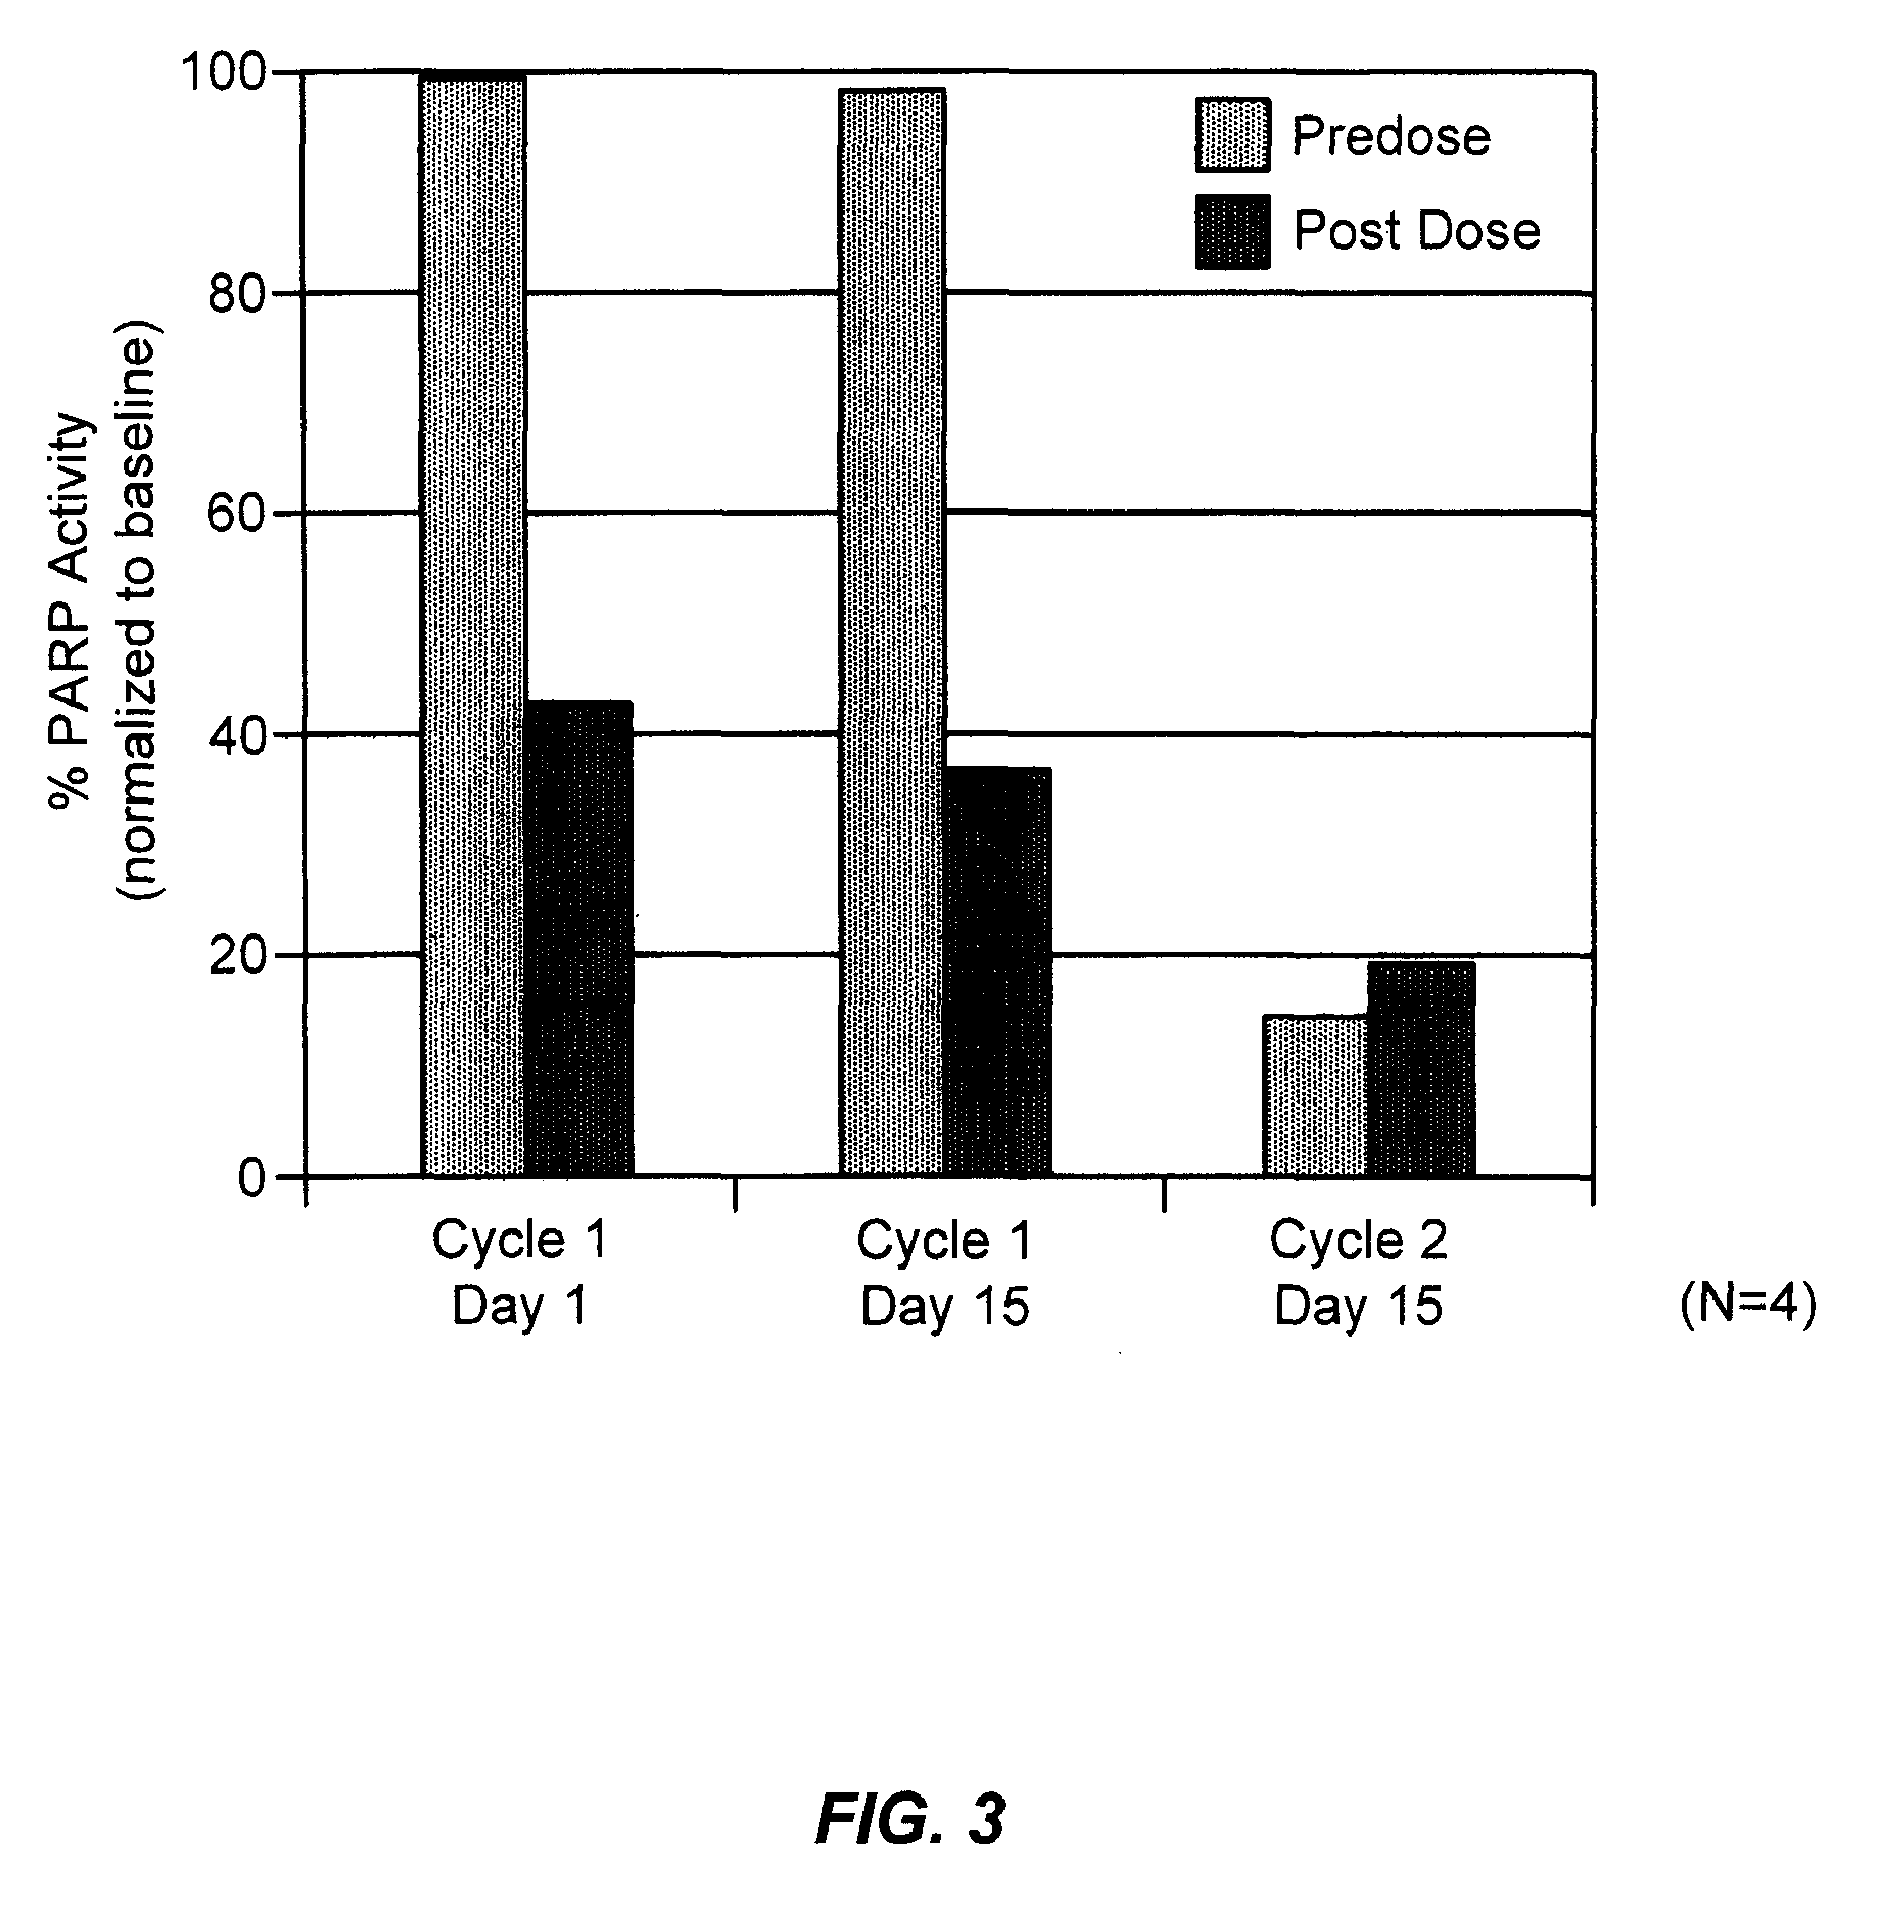 Treatment of breast cancer with a PARP inhibitor alone or in combination with anti-tumor agents